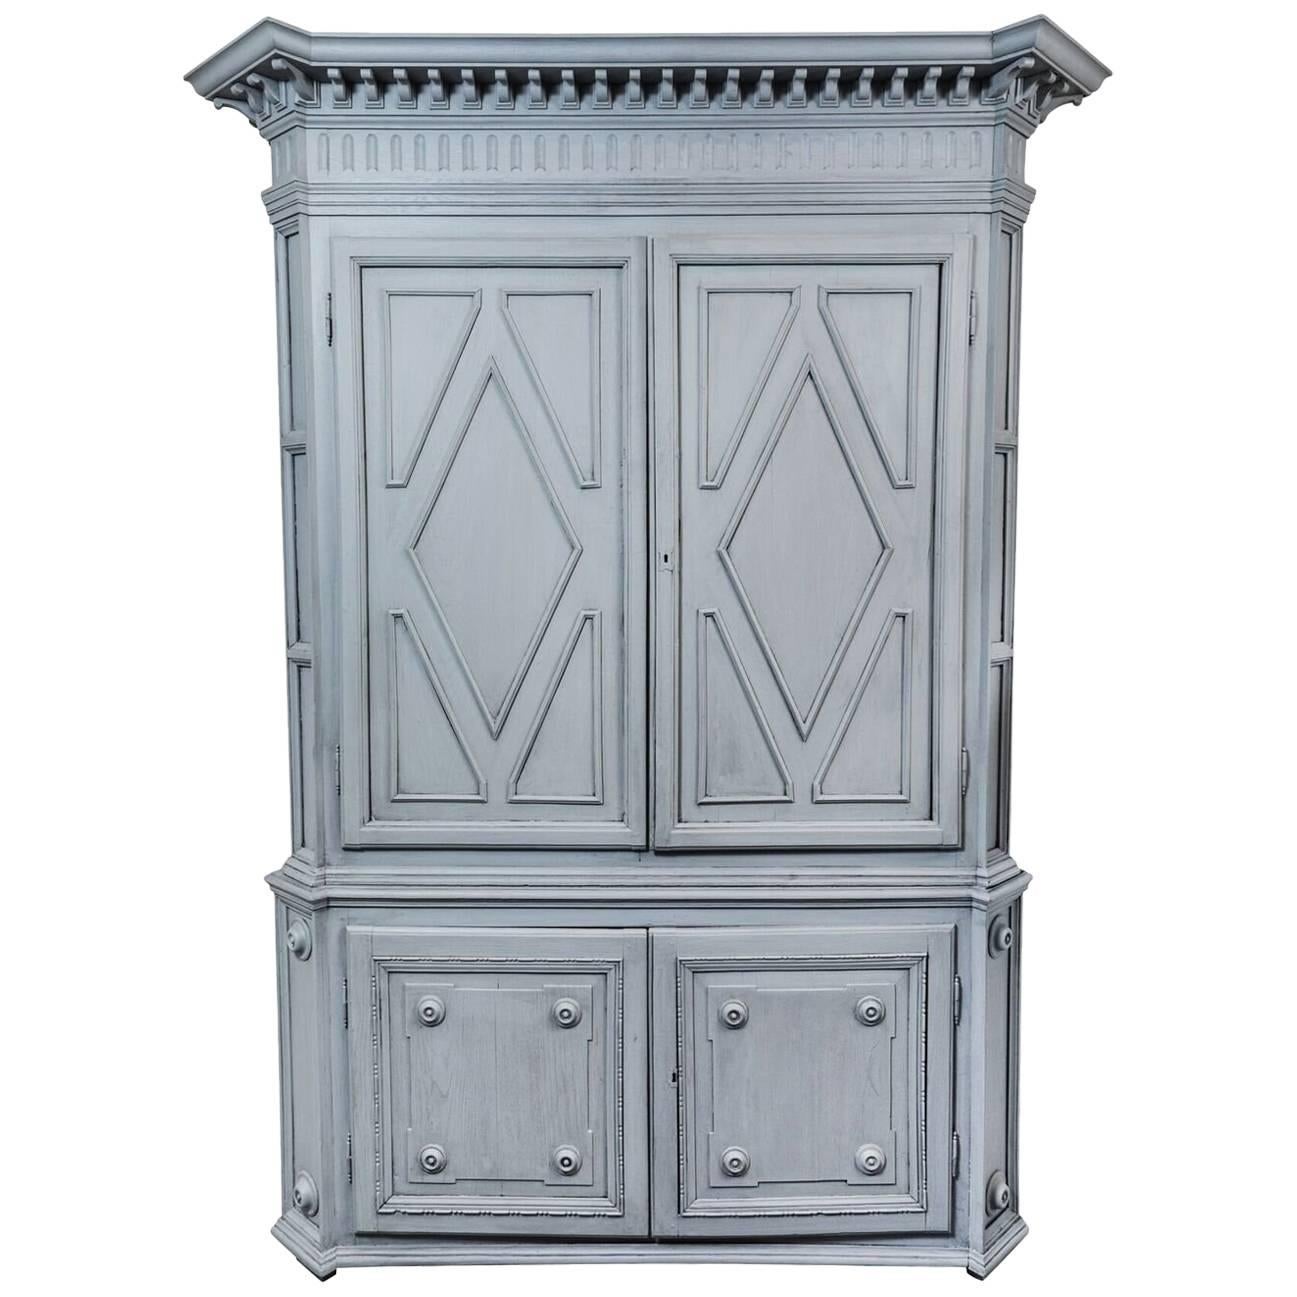 Early, 19th Century French Cabinet in Steel Blue